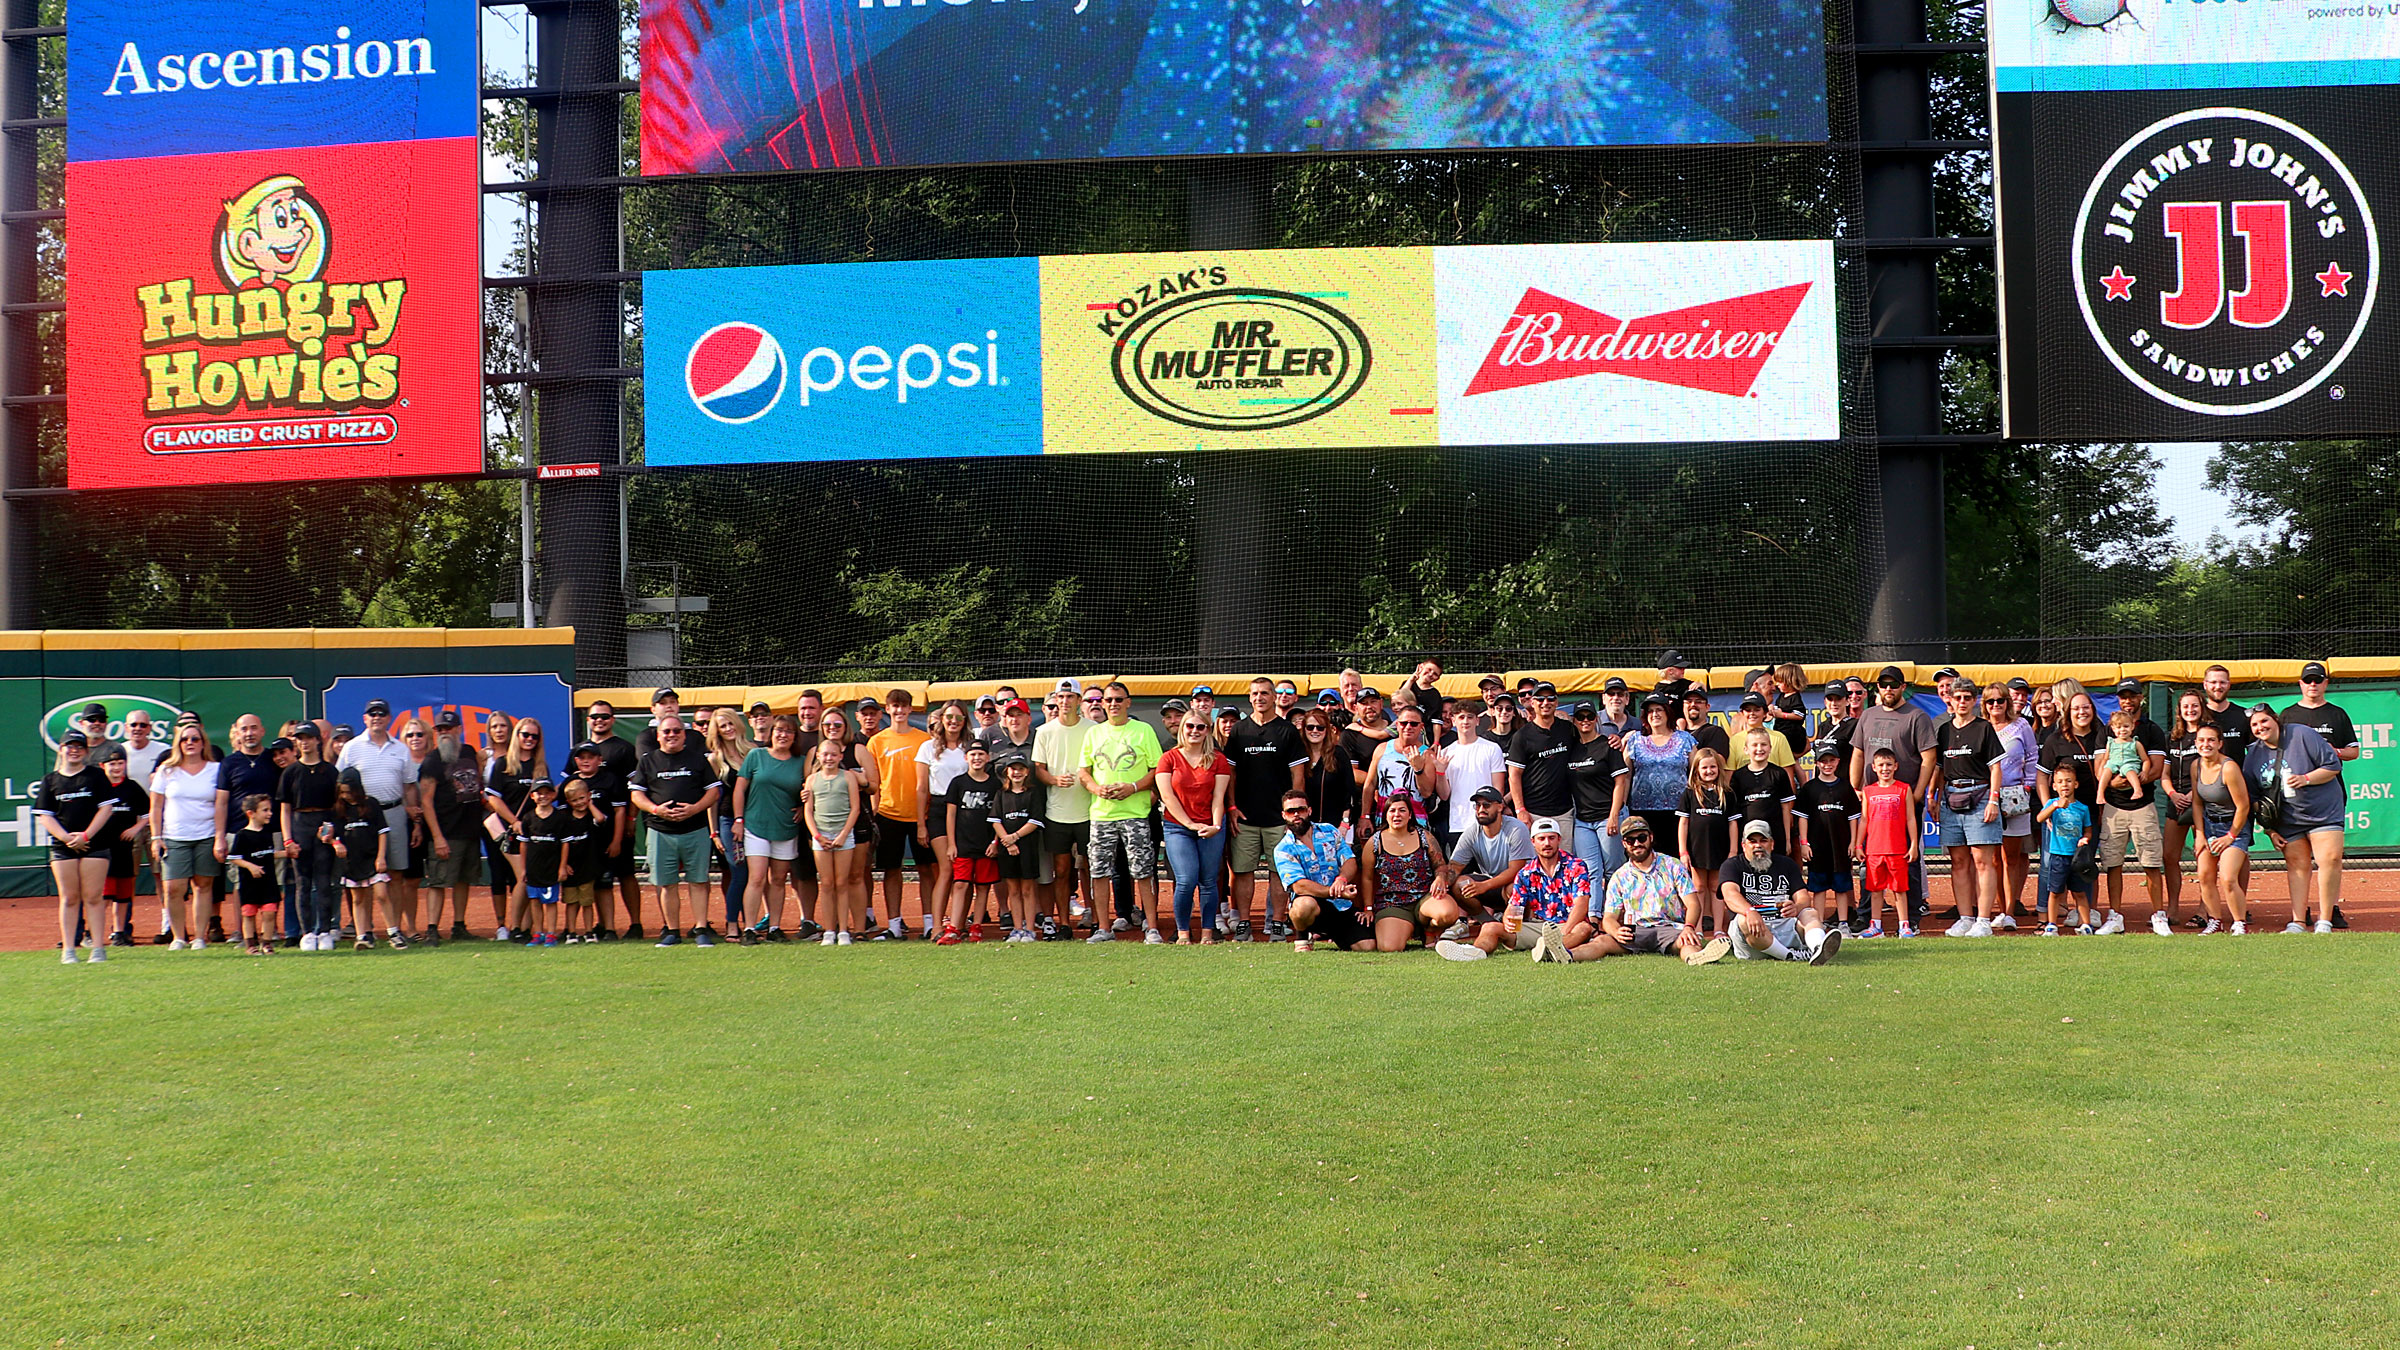 Featured image for “Fun Under the Sun: Futuramic’s Summer Outing at Jimmy John’s Baseball Field”